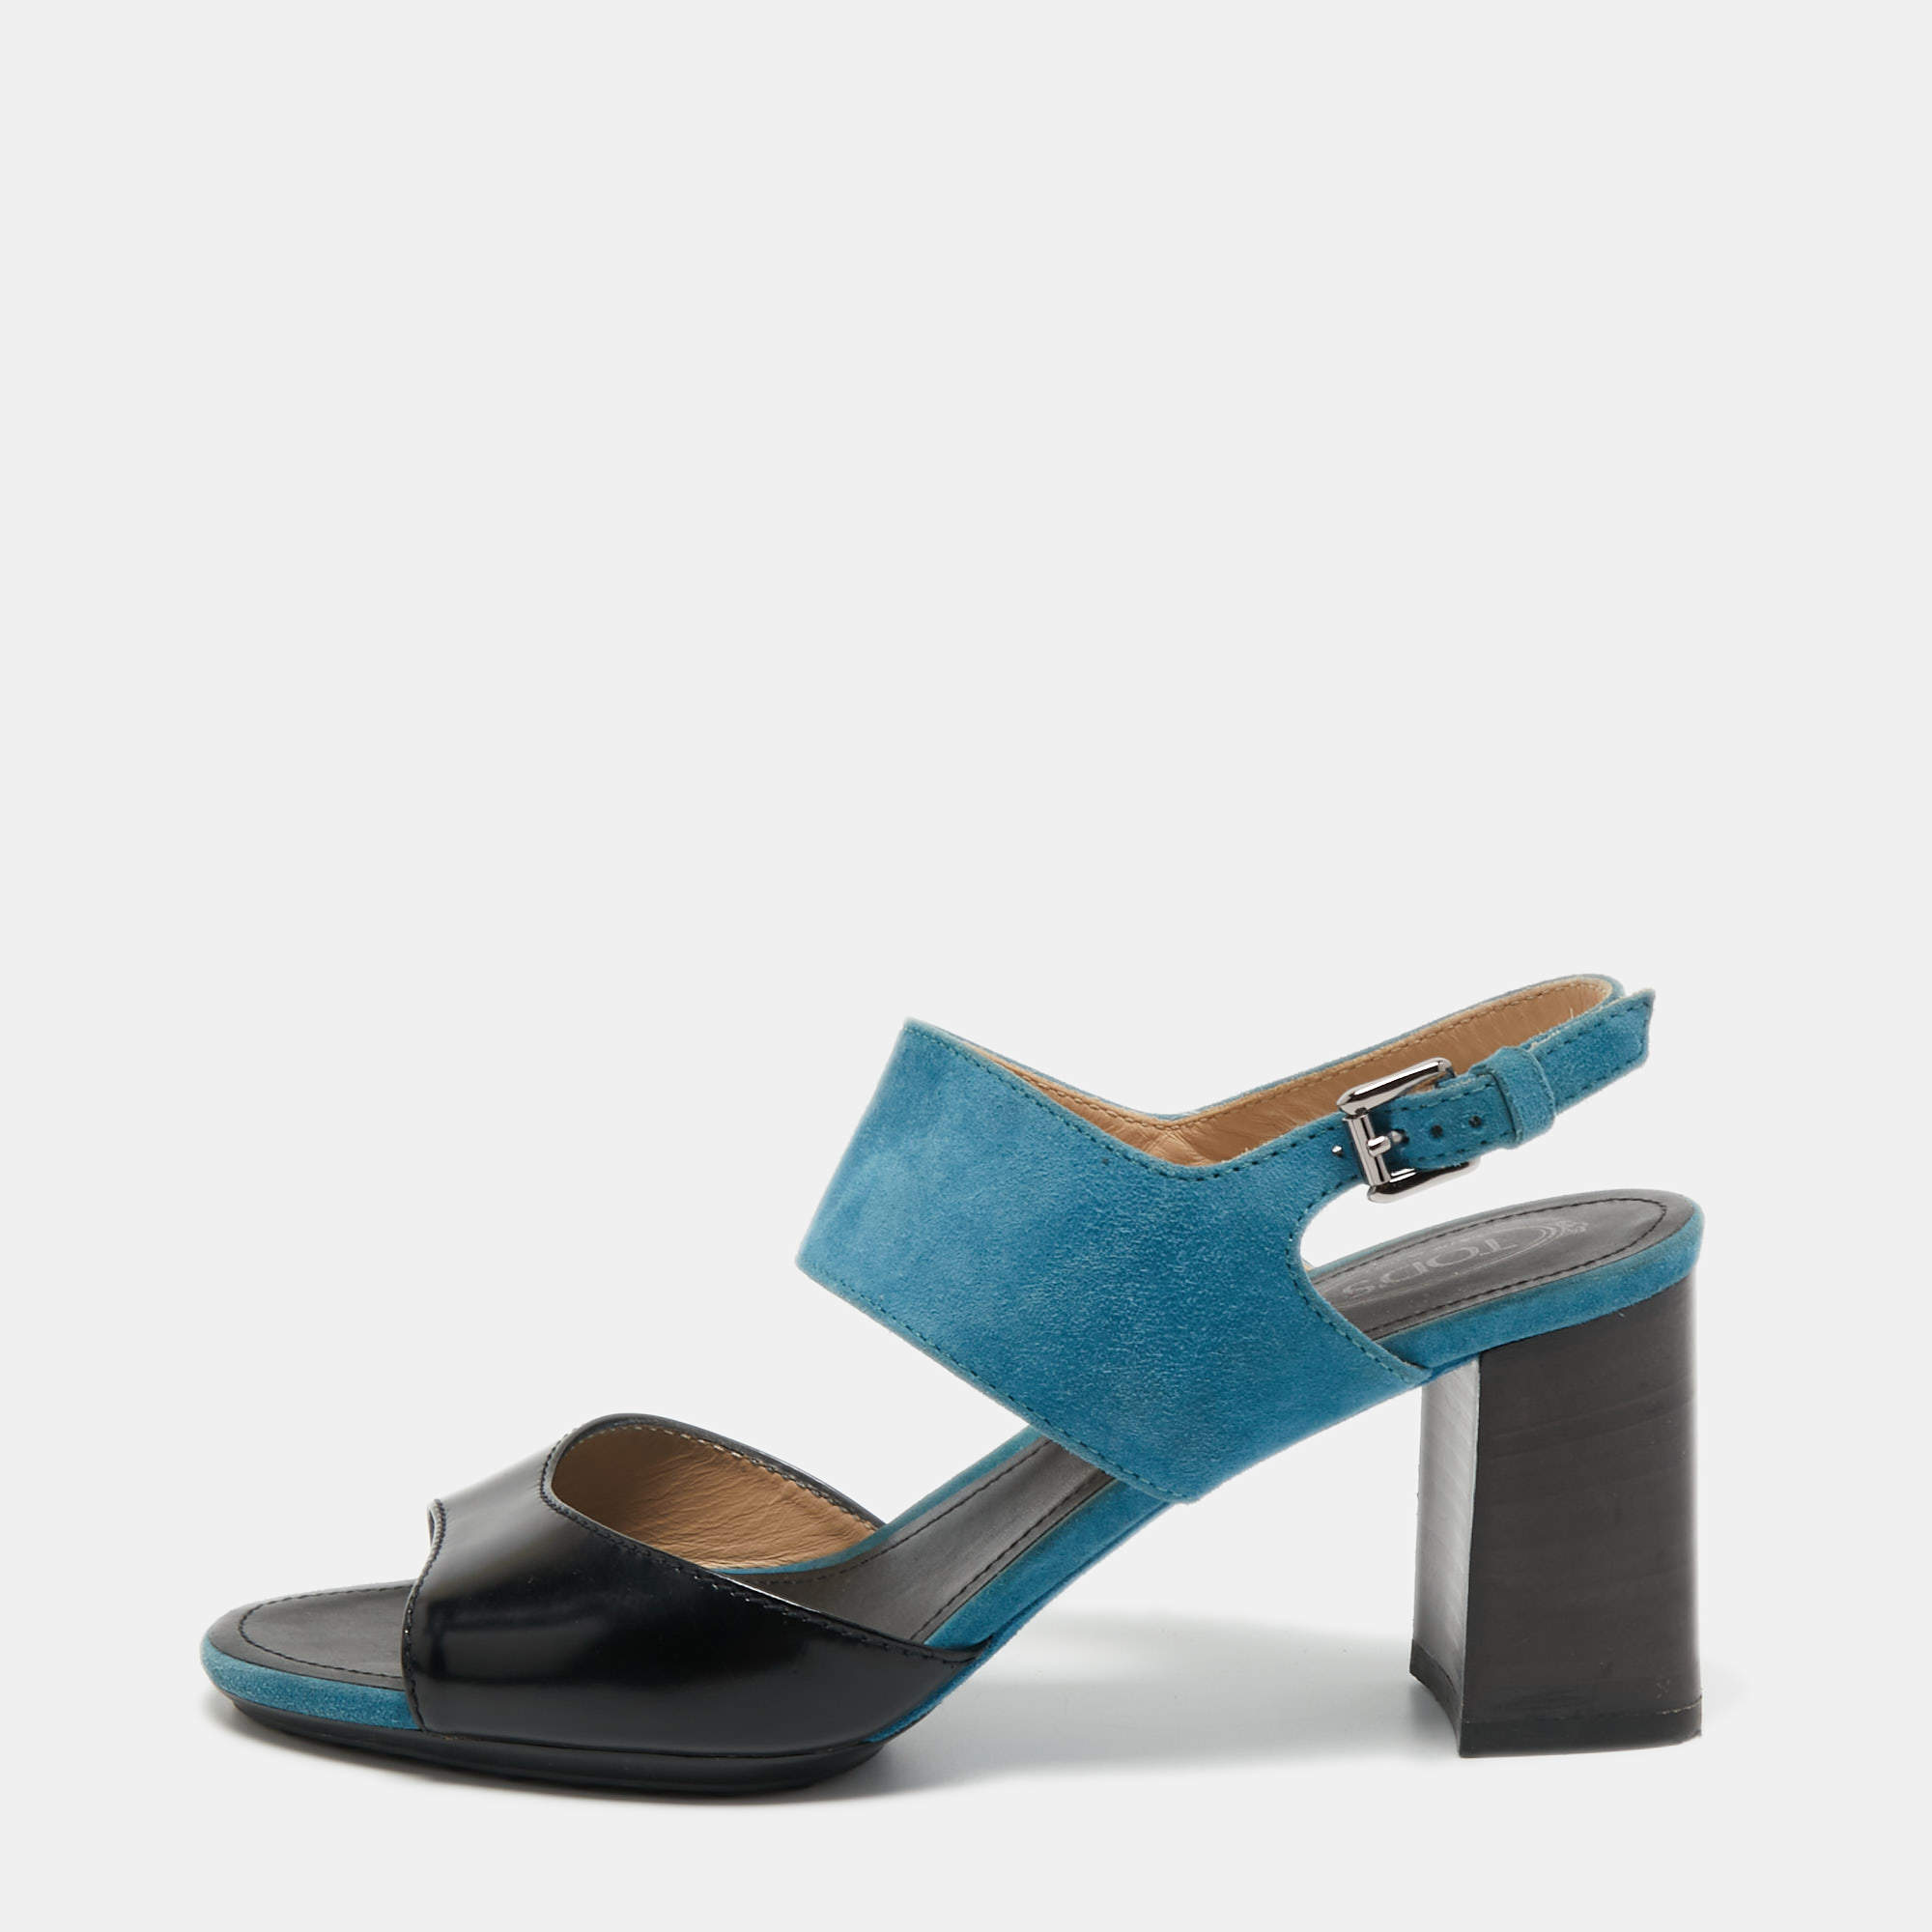 Tod's Black/Blue Suede and Leather Ankle Strap Sandals Size 37.5